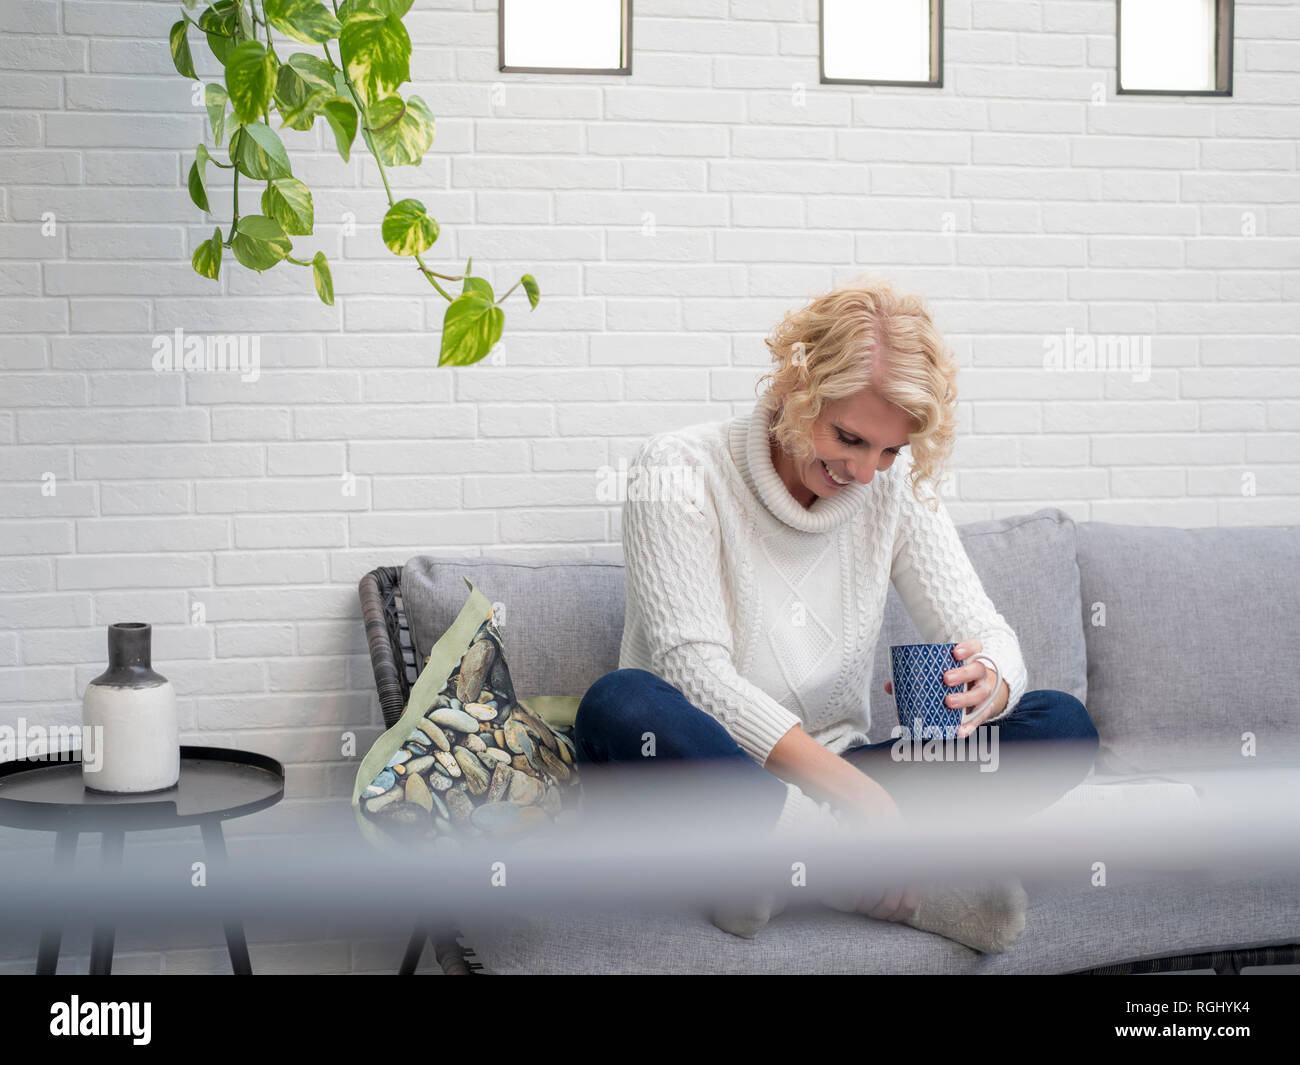 Smiling mature woman sitting on couch at home holding coffee mug Stock Photo